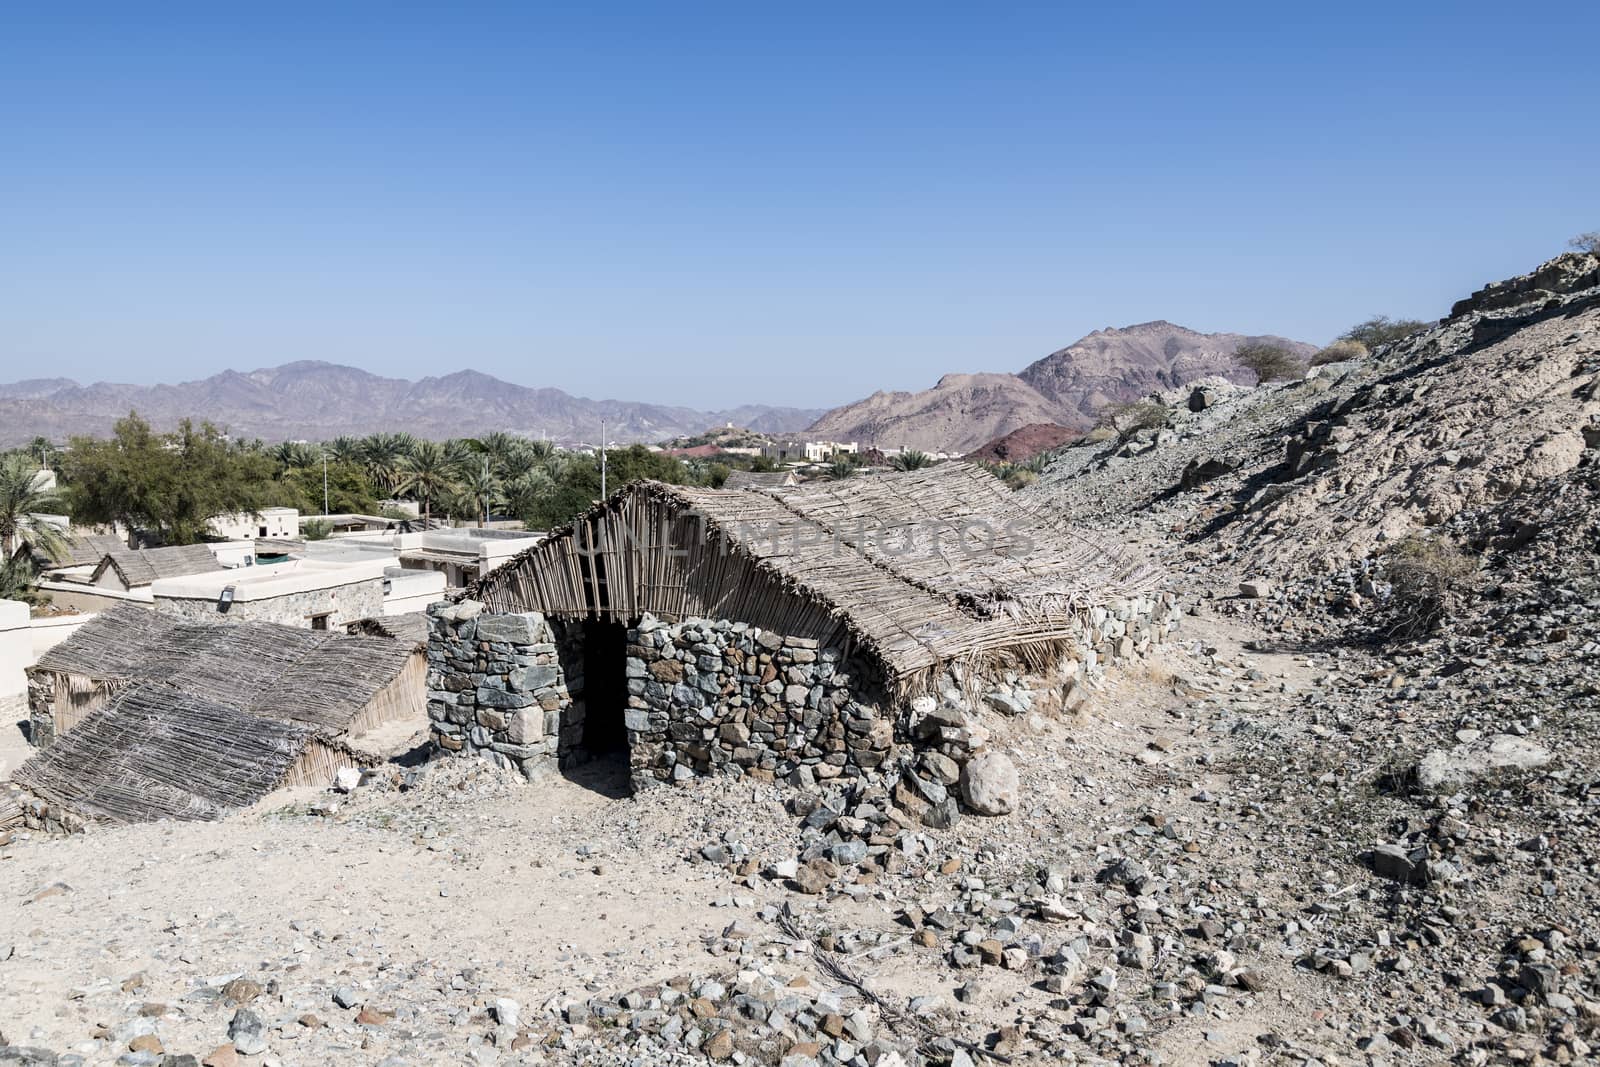 Houses in stones at Hatta Heritage Village, preserved, reconstructed and opened in 2001 by the government to showcase rural living dating back centuries. Dubai Emirates, United Arab Emirates